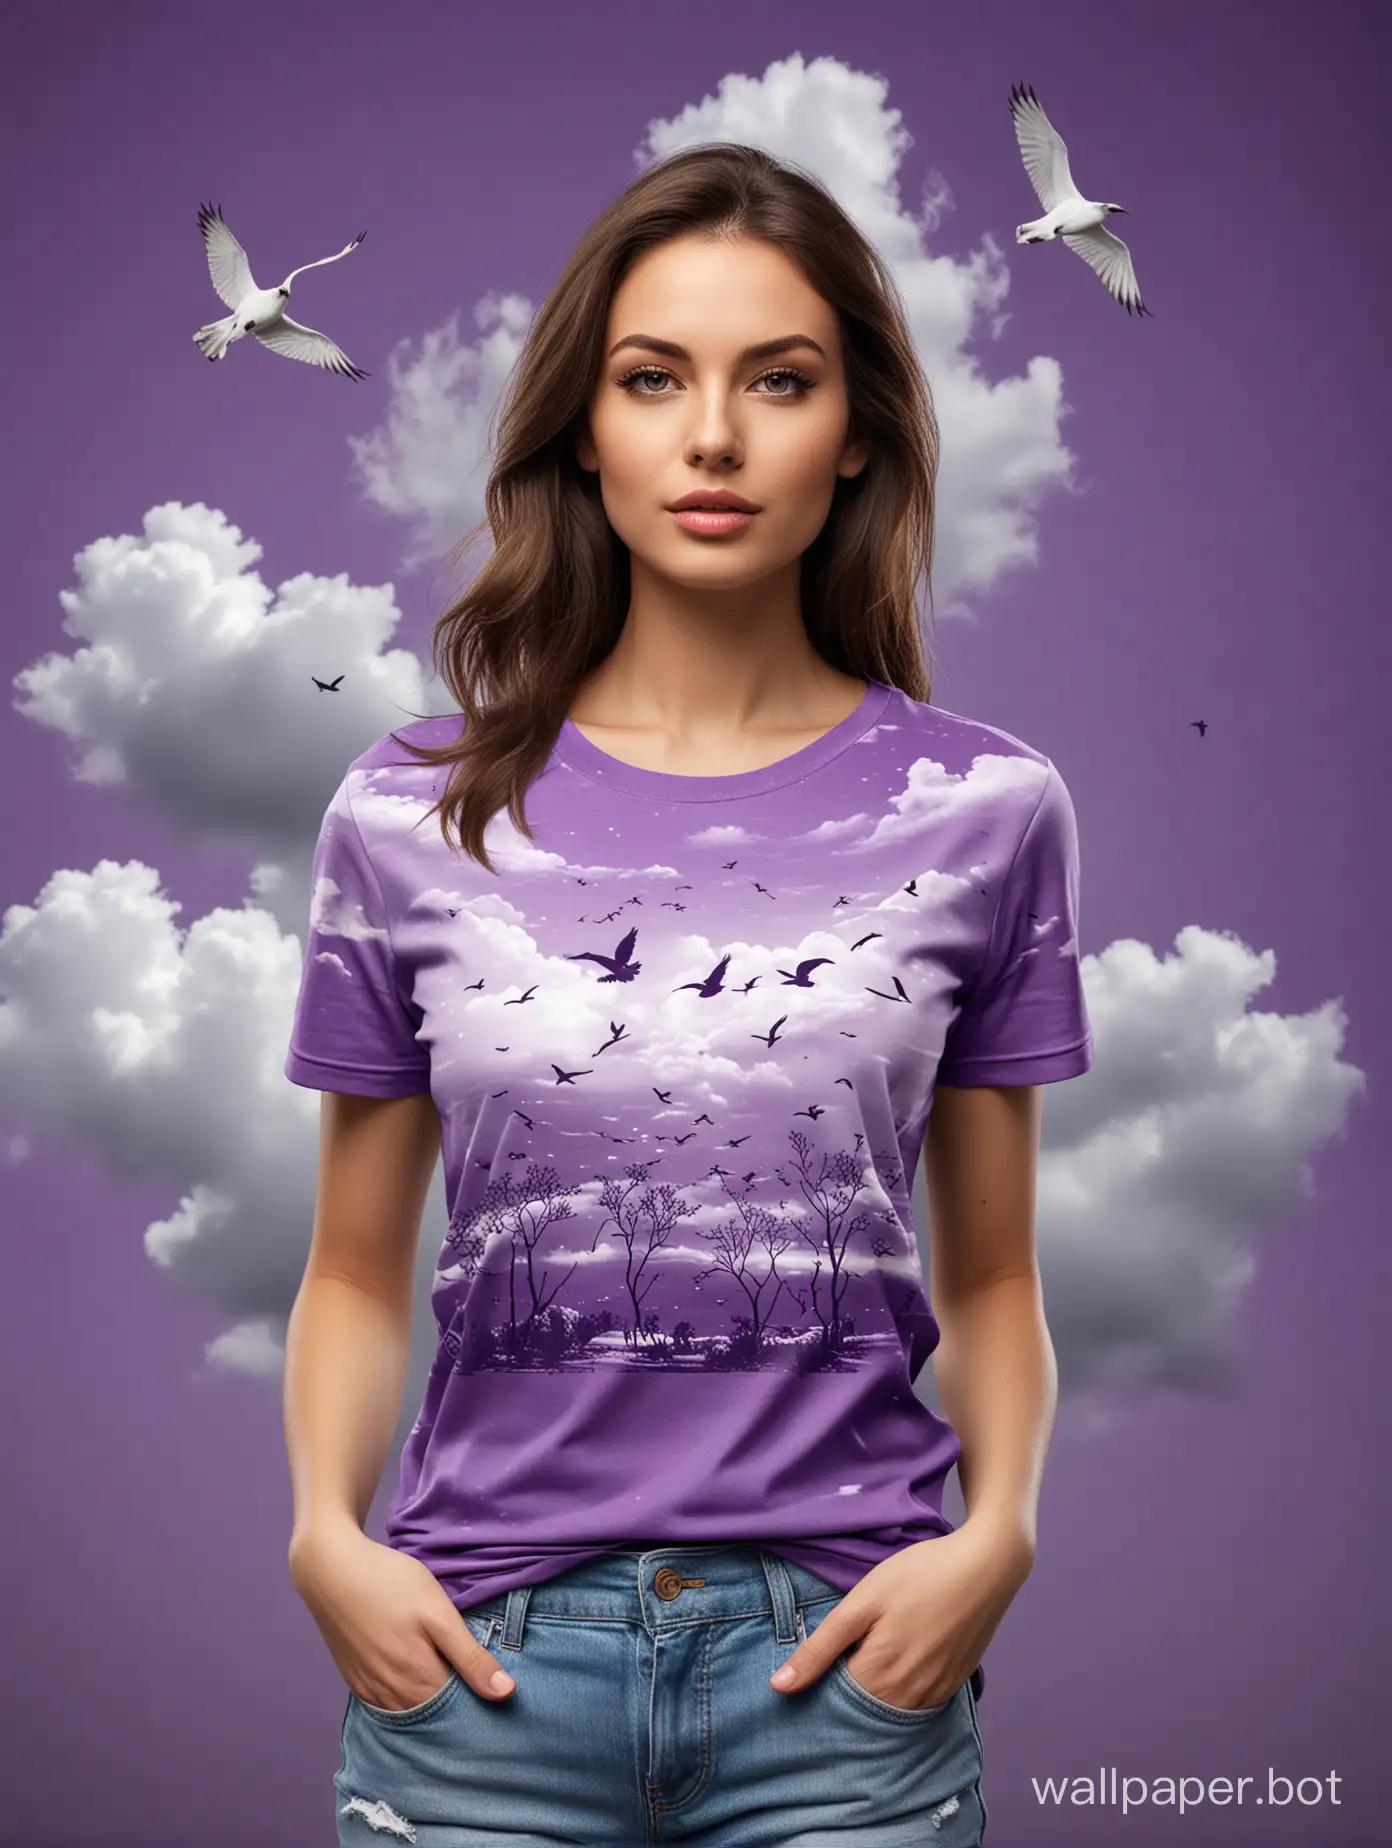 T shirt mockup template, beautiful model woman, birds illustration in the shirt, purple shirt, heavy clouds background, hipperealistic